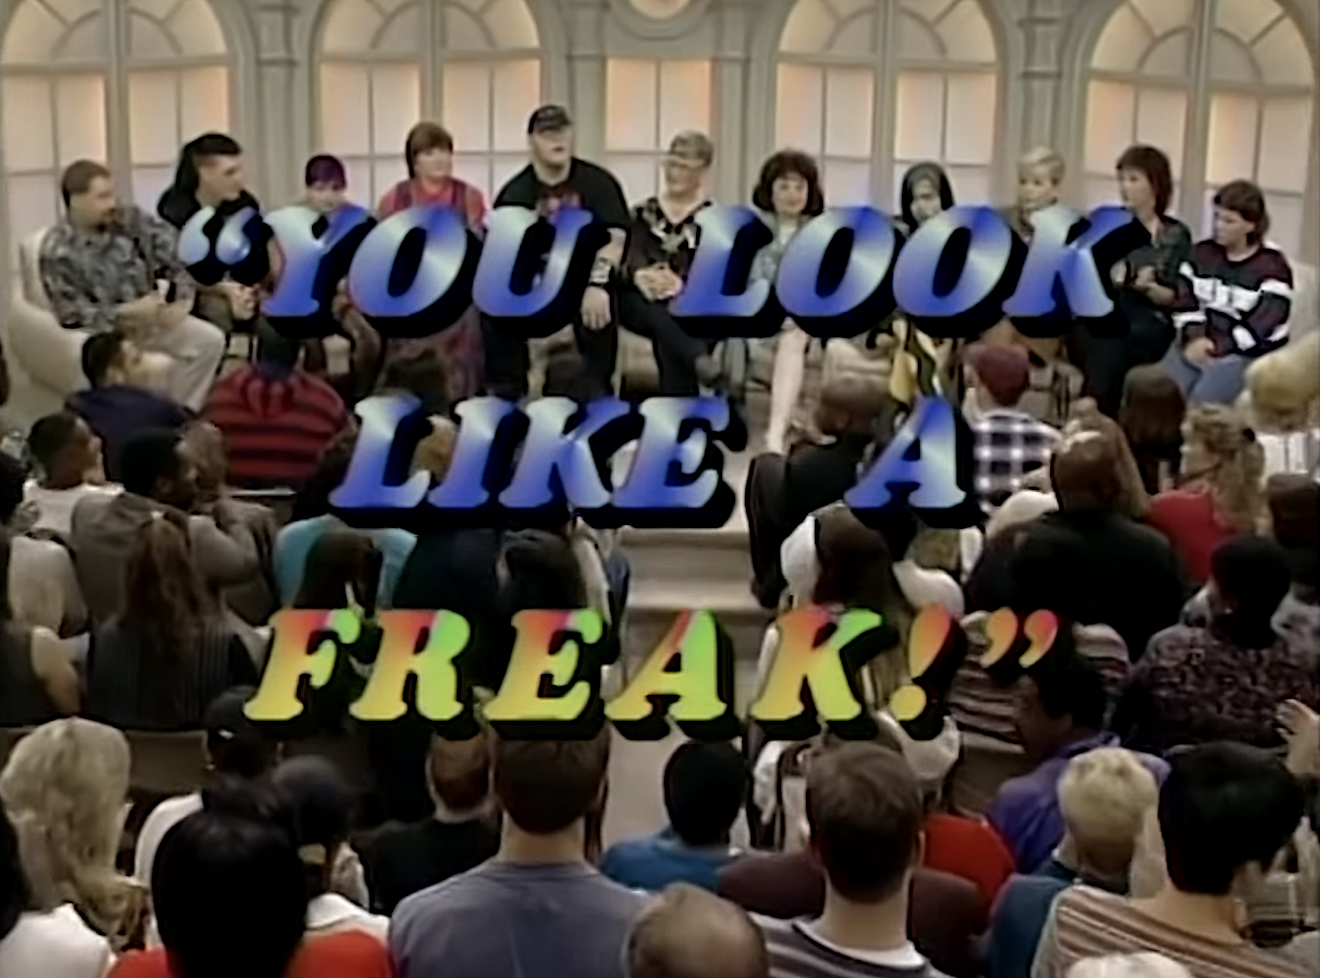 &quot;You look like a freak!&quot;